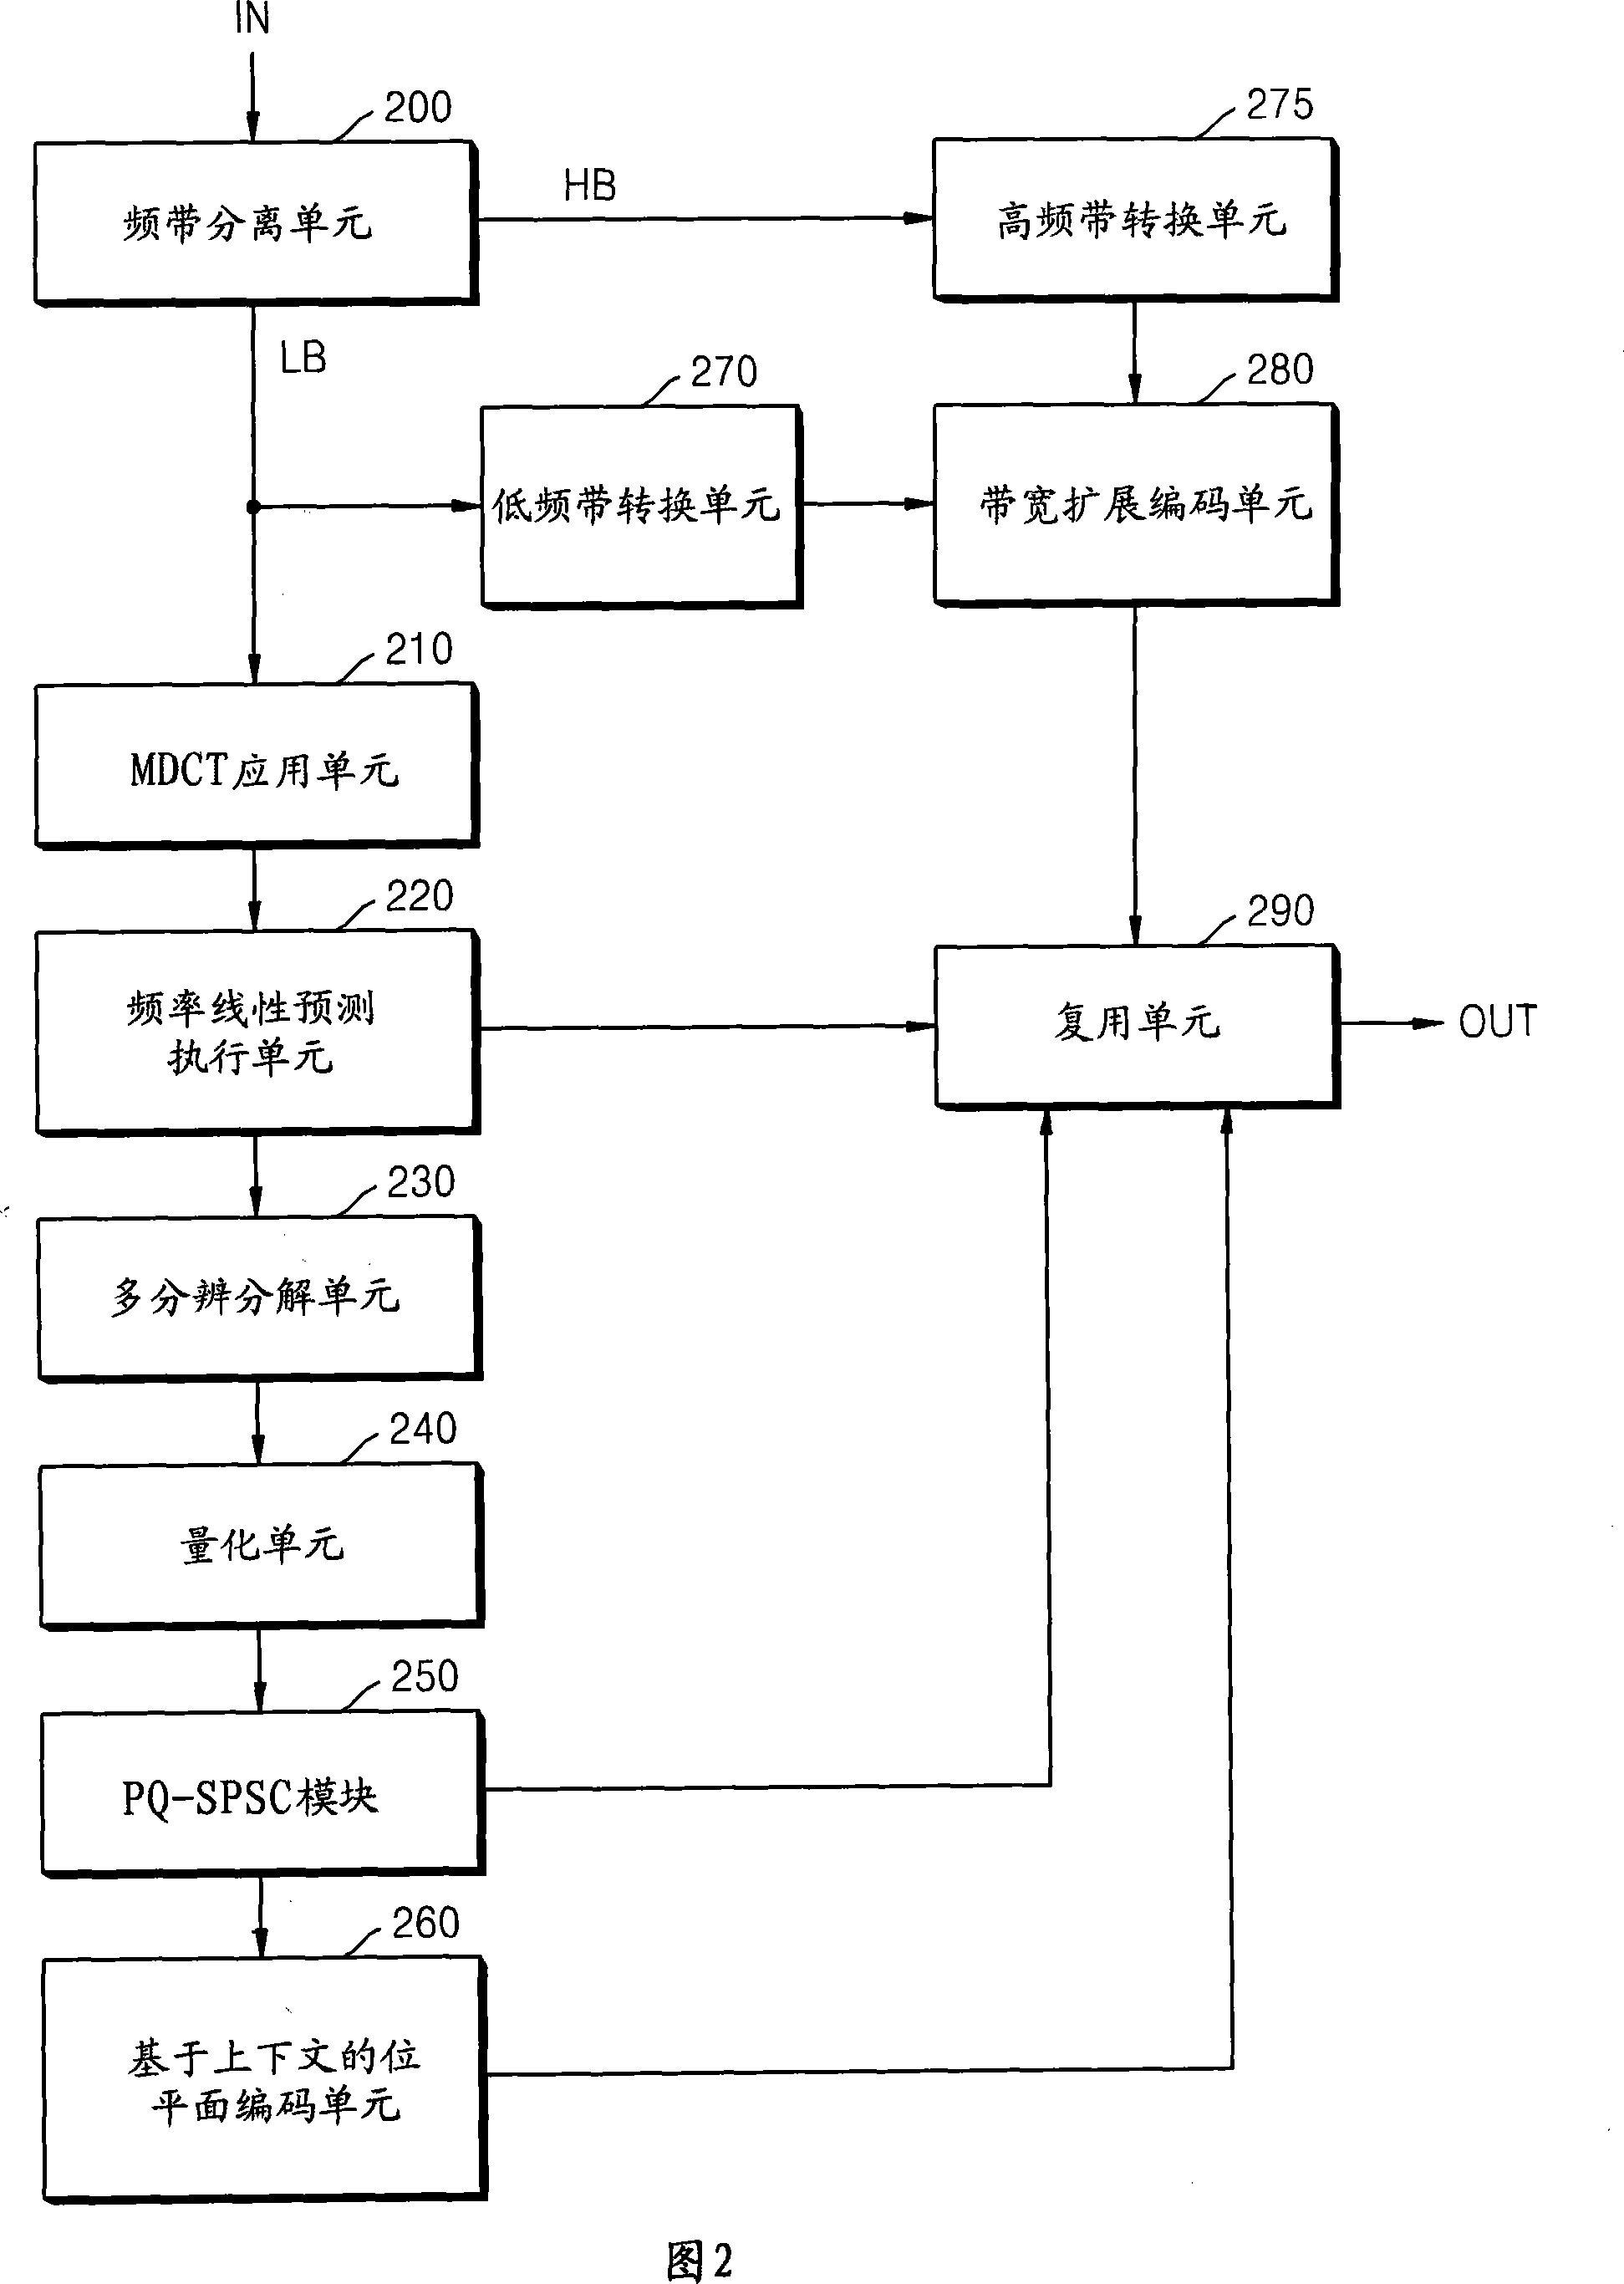 Method and apparatus to encode and decode audio signal by using bandwidth extension technique